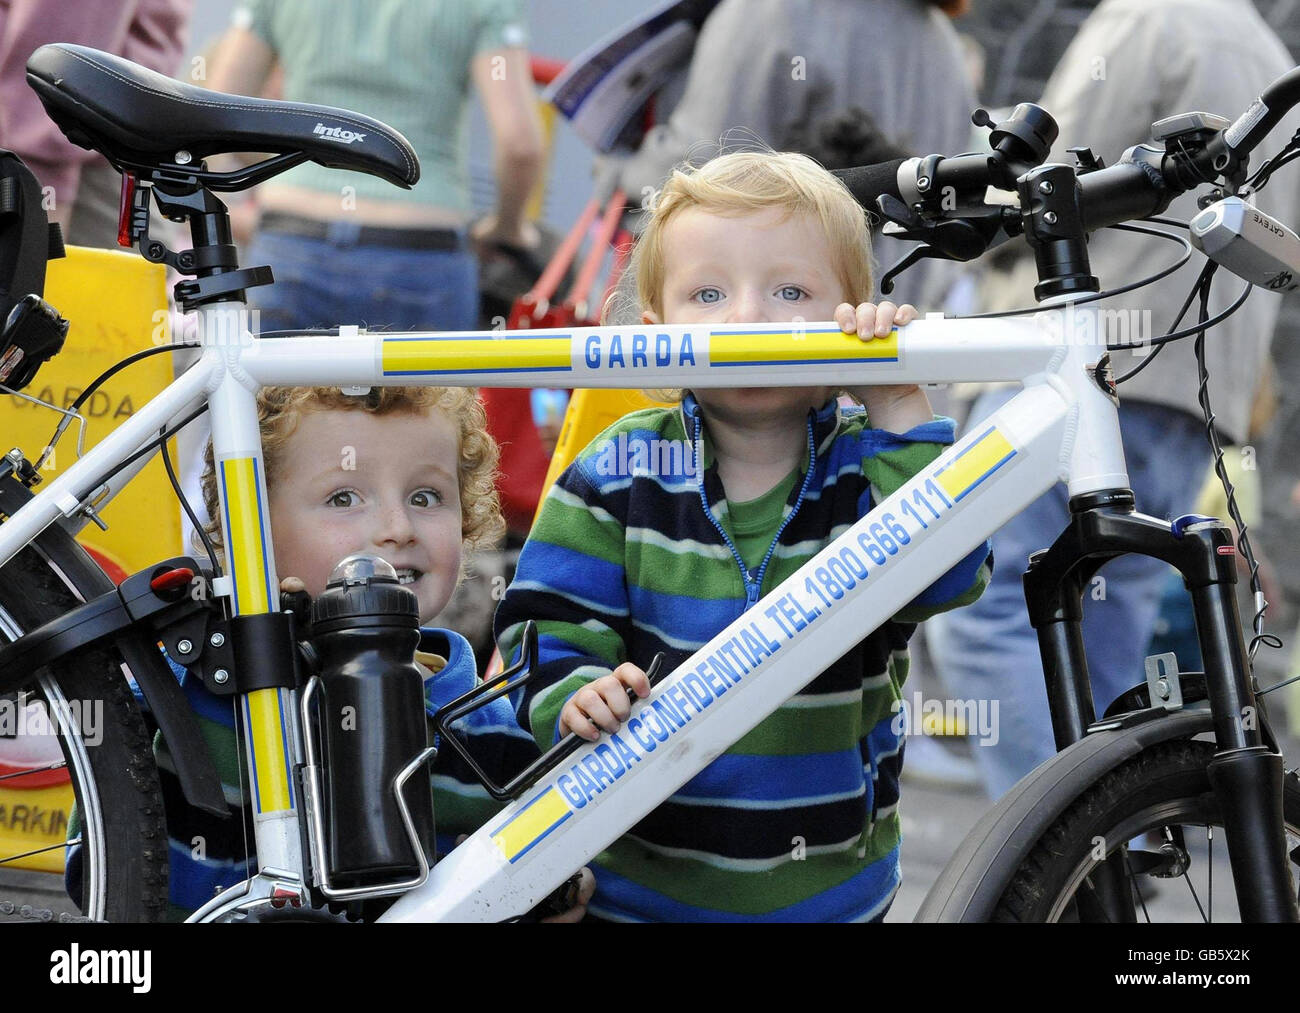 A child stands next to a police bike during the Intercultural Family Day at Lucan Garda Station in Co Dublin, an event aimed at strengthening relationships between gardai and the local community, particularly members of the immigrant community. Stock Photo